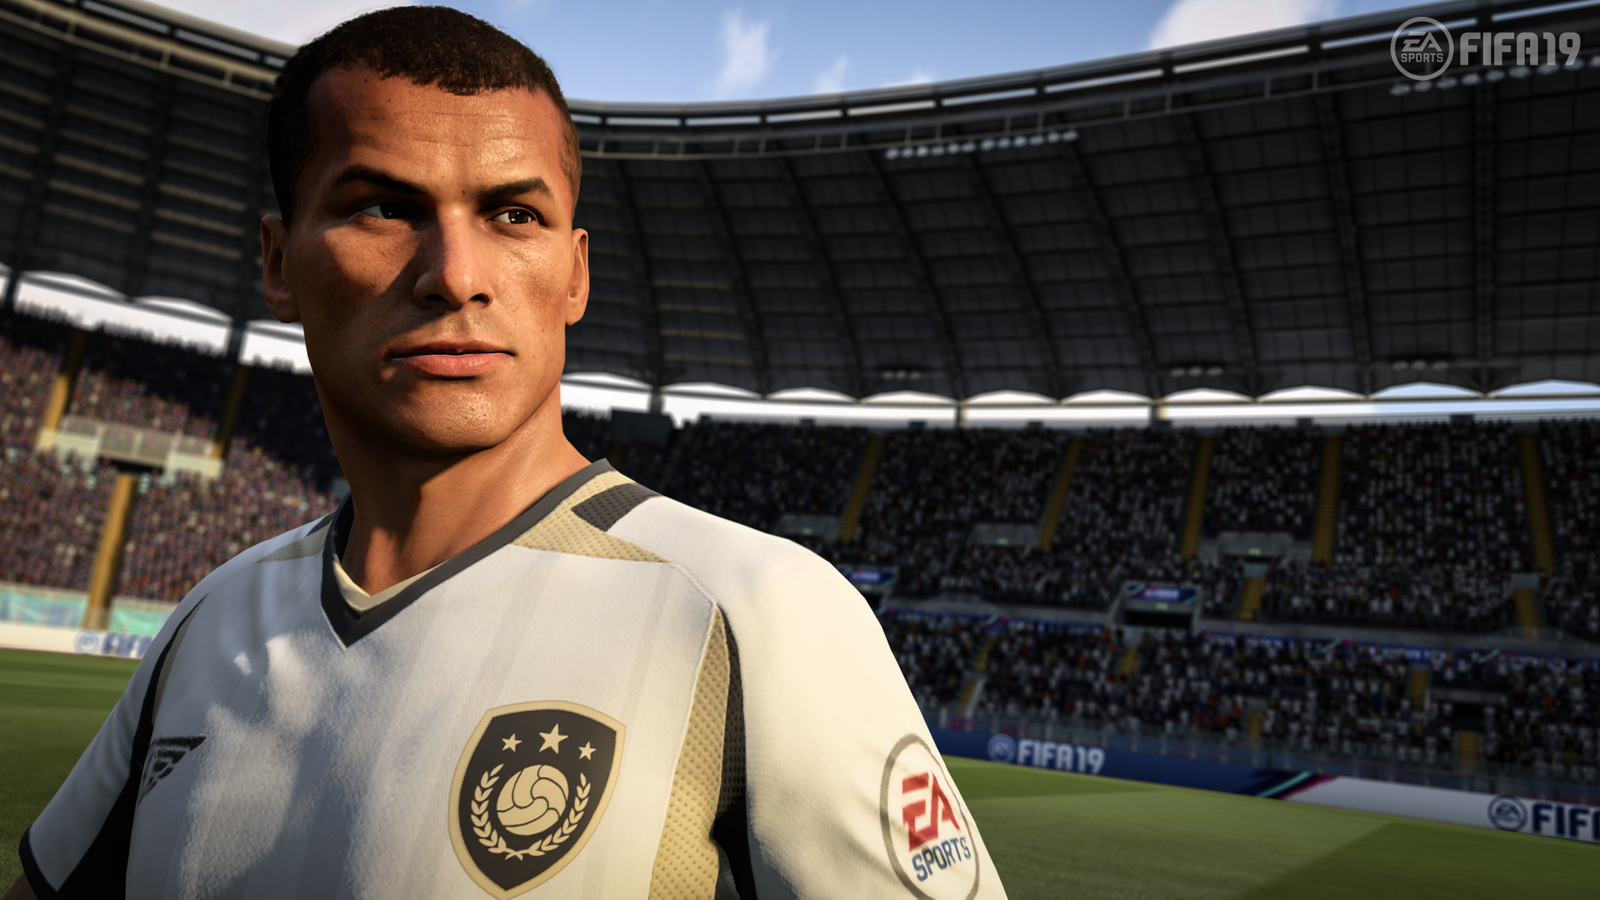 Here's the FIFA Ultimate Team 2019 jersey